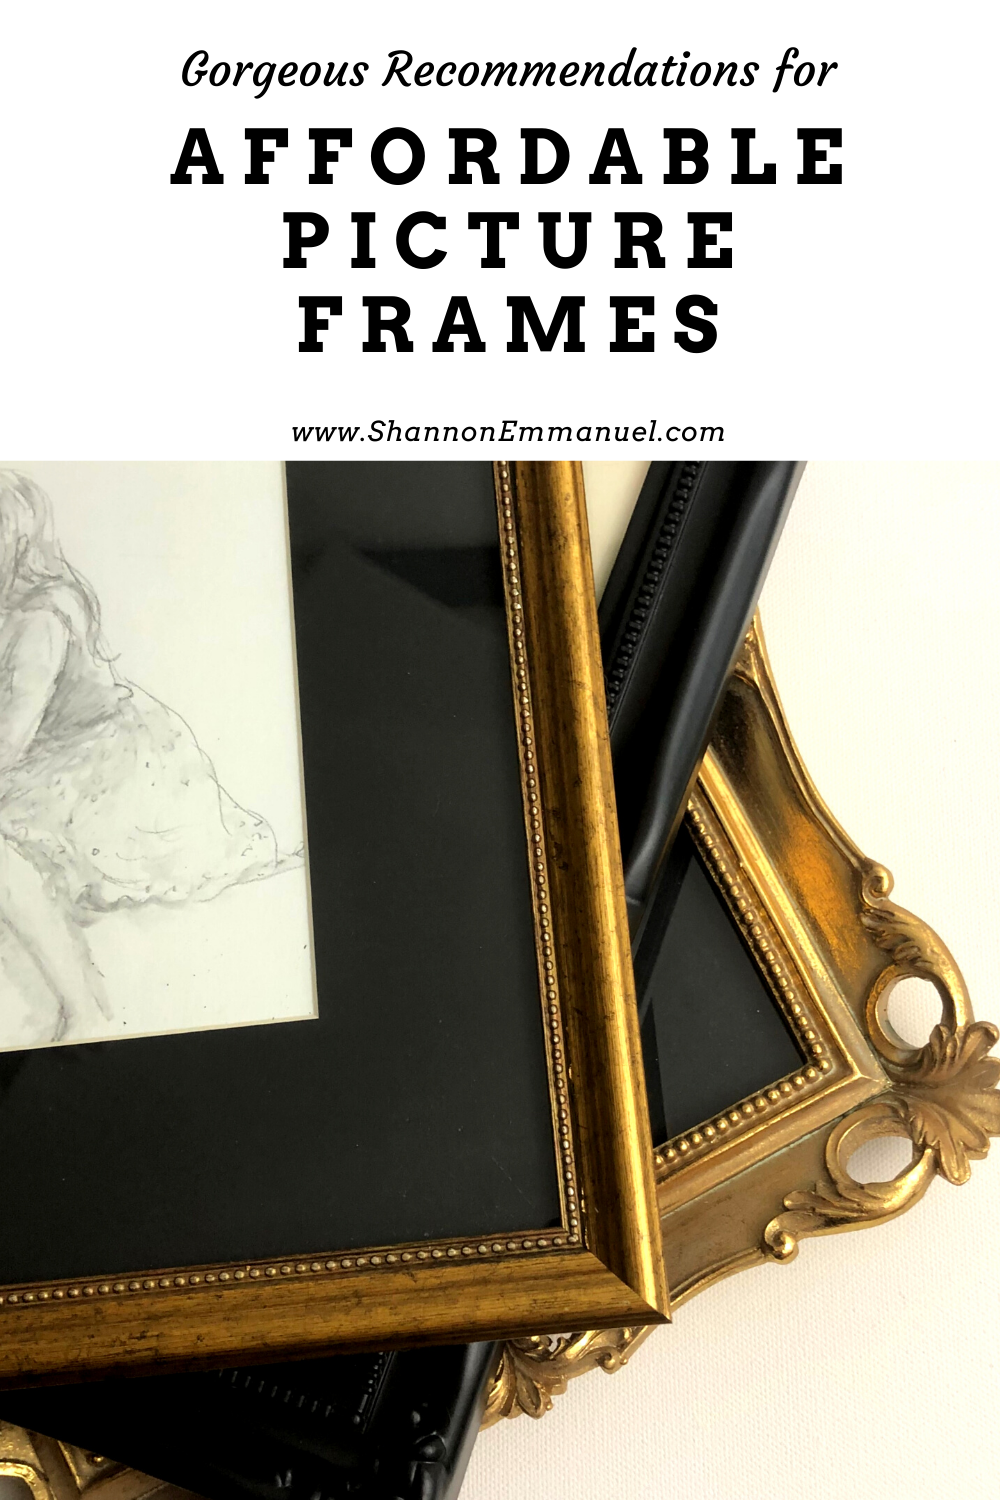 Picture Frames make a Difference!